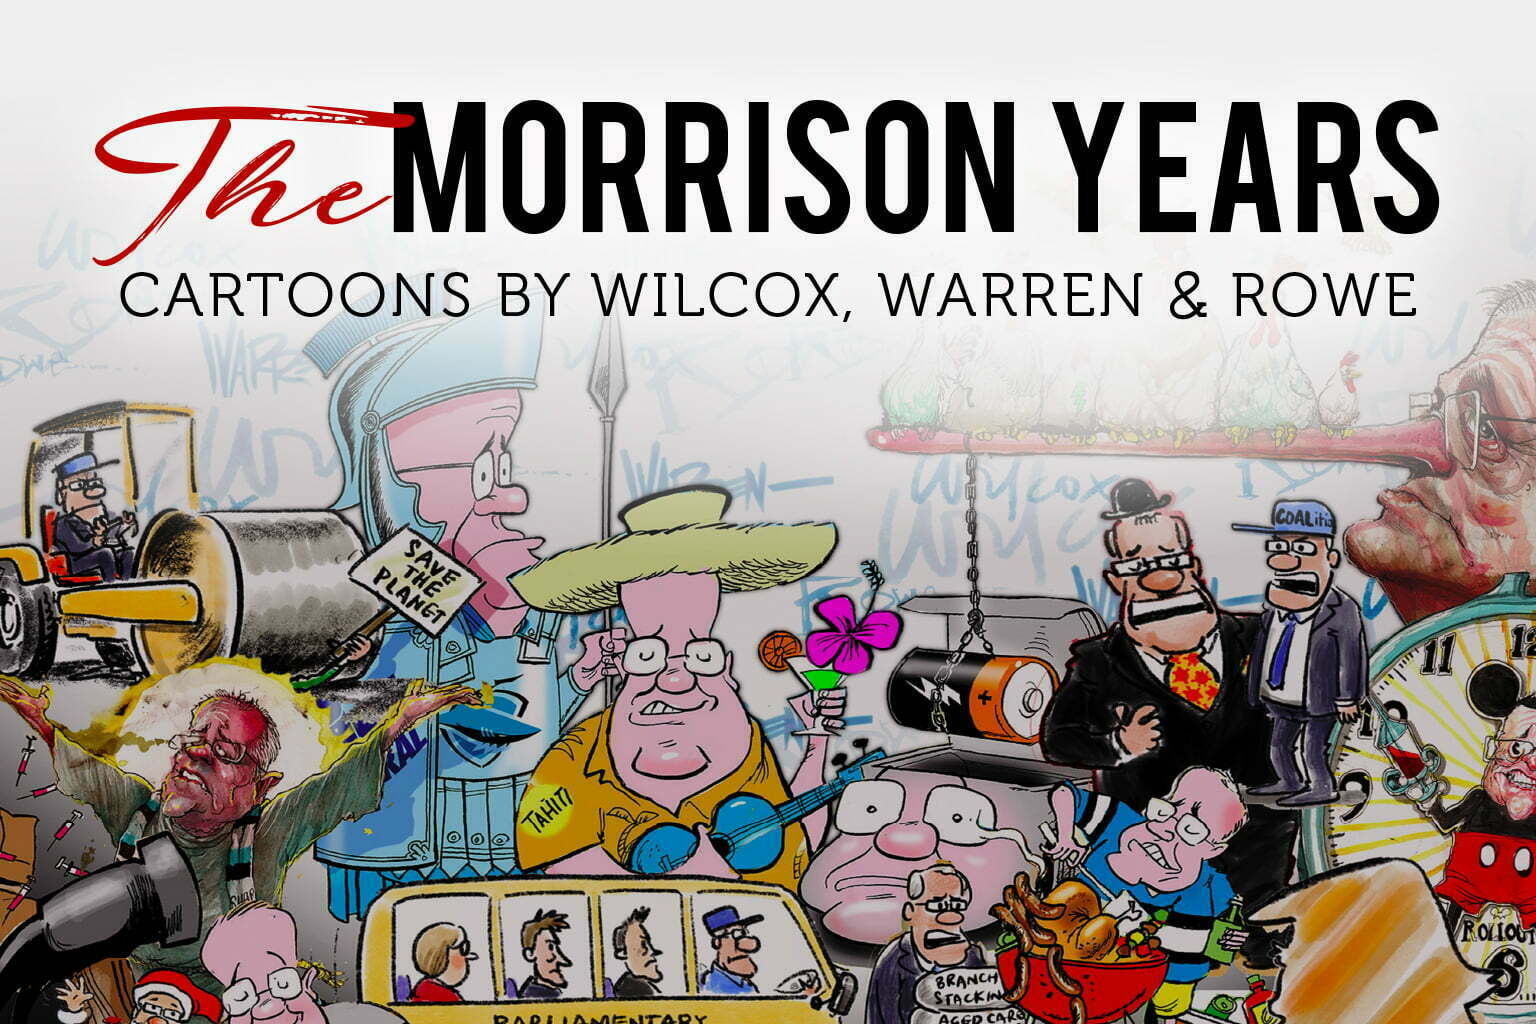 The Morrison Years